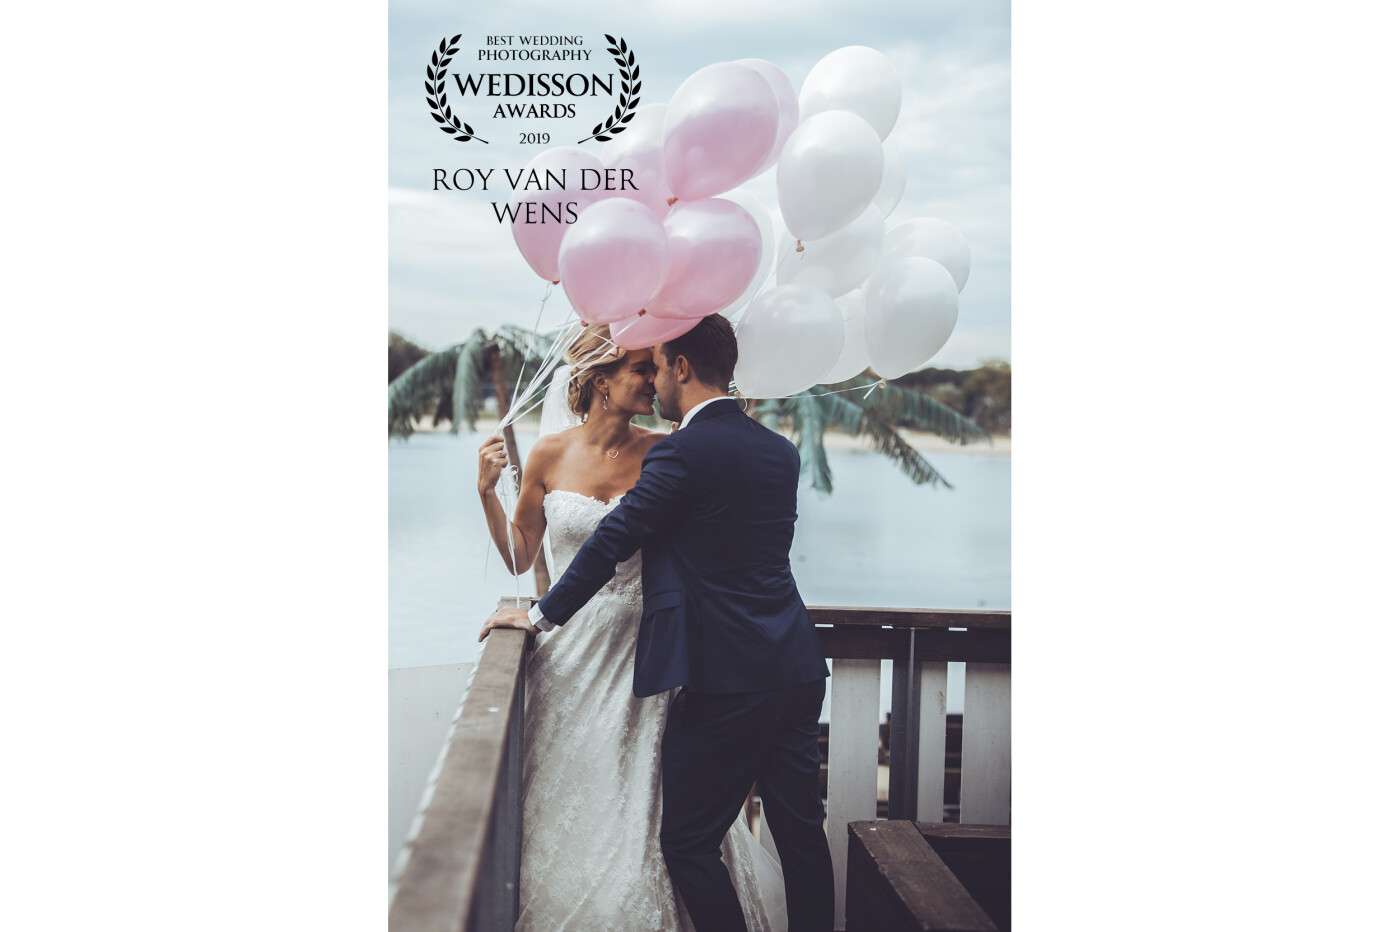 A dutch wedding couple celebrating their wedding day with ballons on a beach. <br />
This beach wedding was shot near Eindhoven in The Netherlands. 